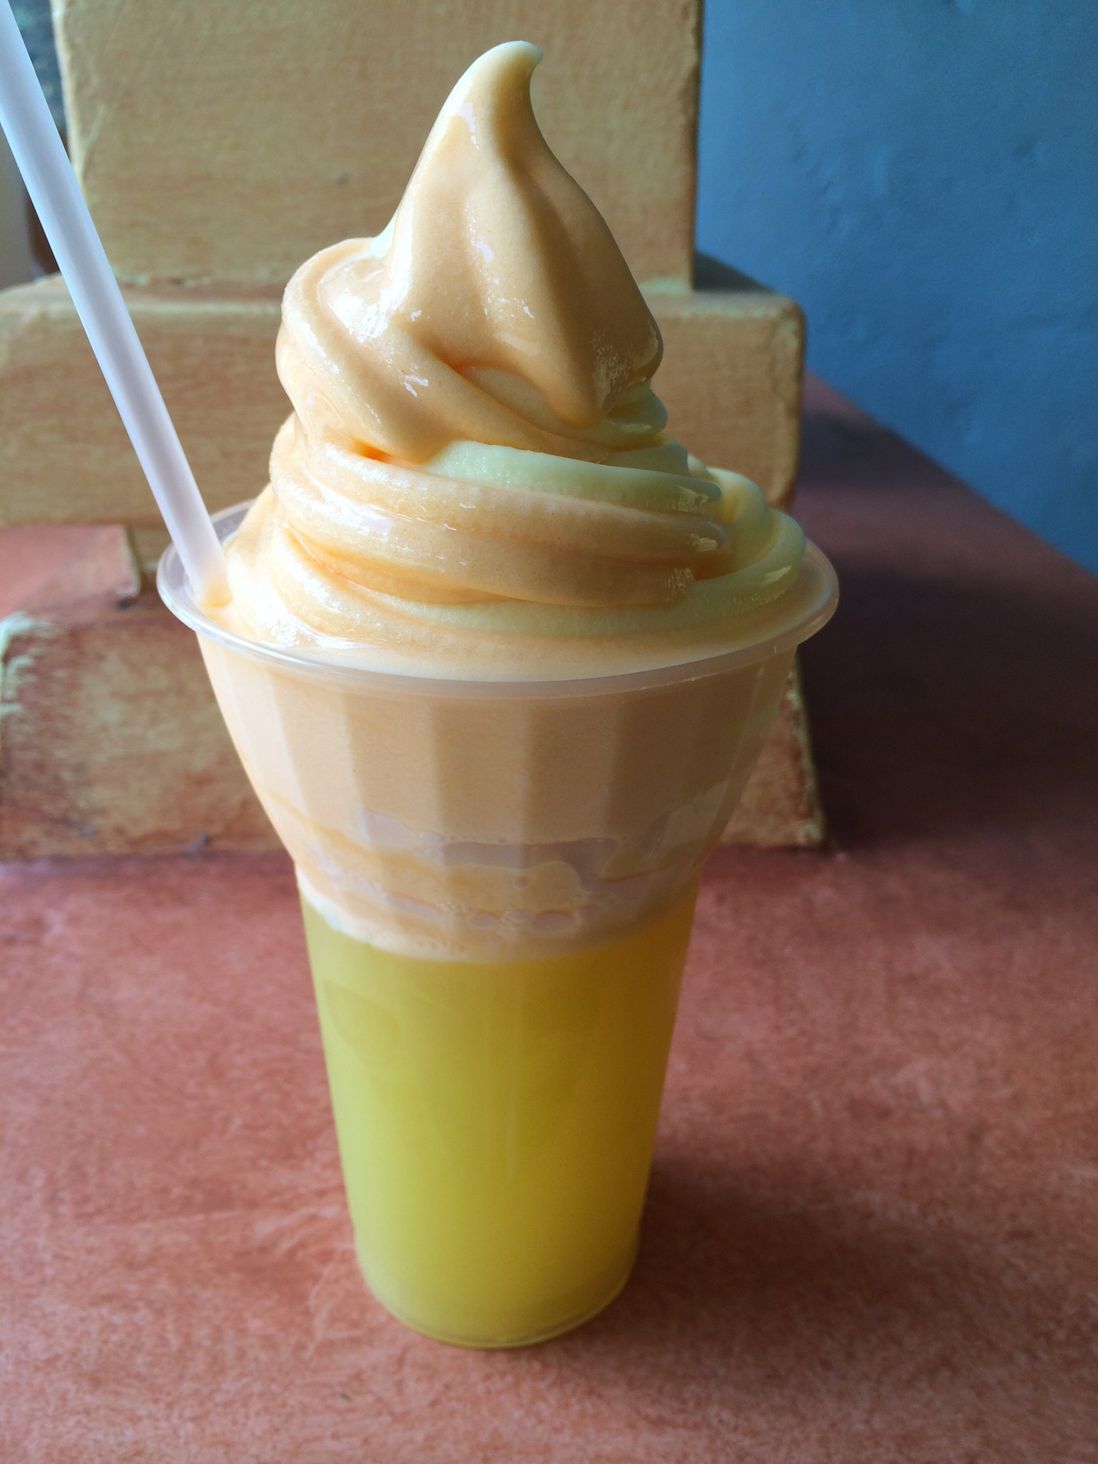 .The most popular snack at Disneyland is their Pineapple Dole Whip, but at Aloha Isle in Disney World, Dole Whip comes in multiple flavors you can't find at Disneyland. The original Dole Whip uses soft-serve Pineapple Sorbet, which you can never go wrong with, but if you want to try something different, they also have Orange Cream Ice Cream, and Vanilla Ice Cream Dole Whips for under $5.